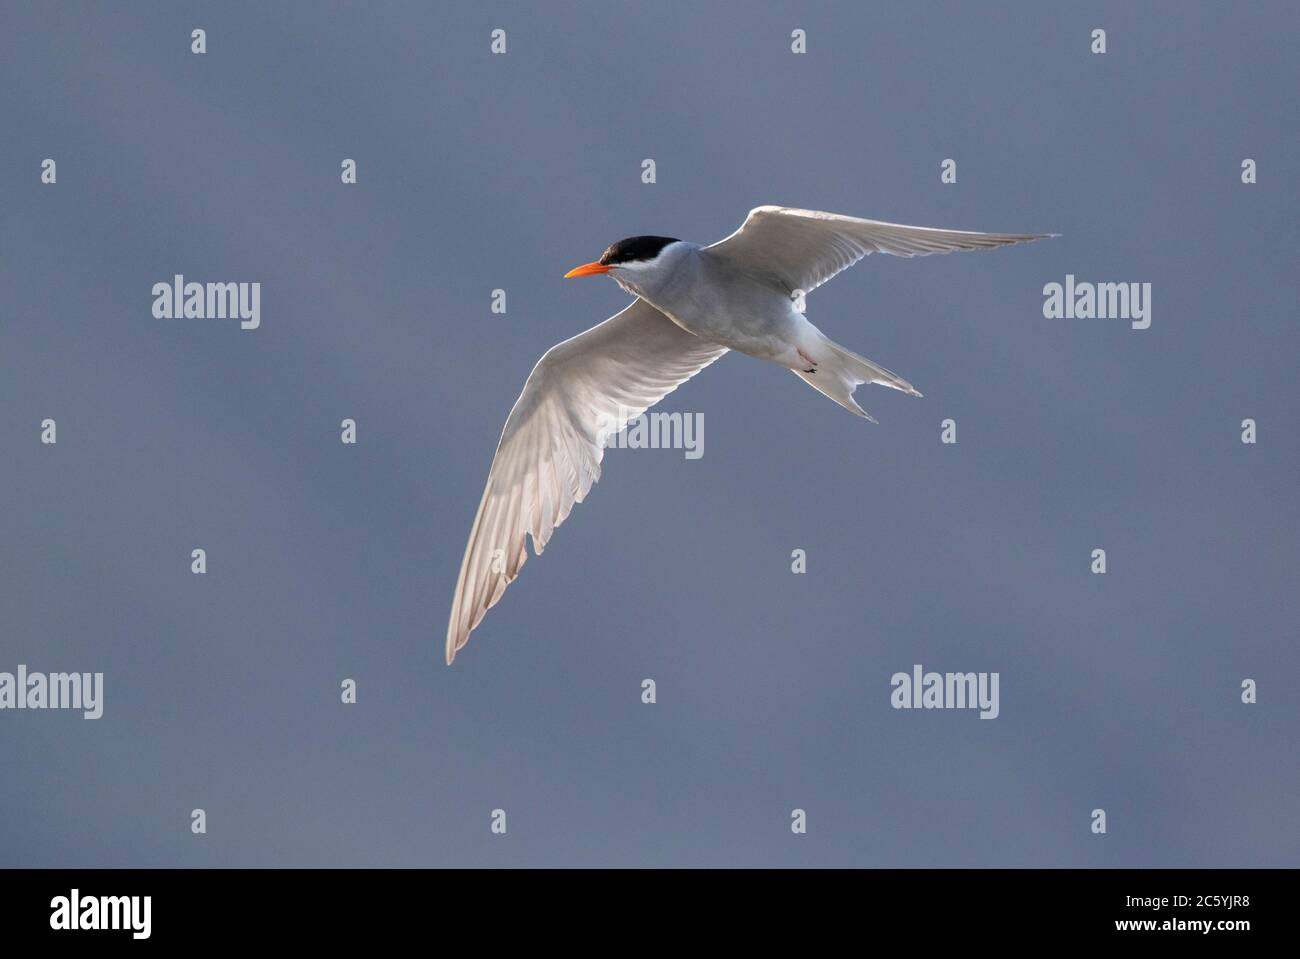 Black-fronted Tern (Chlidonias albostriatus) also known as Tarapiroe in Glentanner Park, South Island, New Zealand. Flying in front of a mountain slop Stock Photo